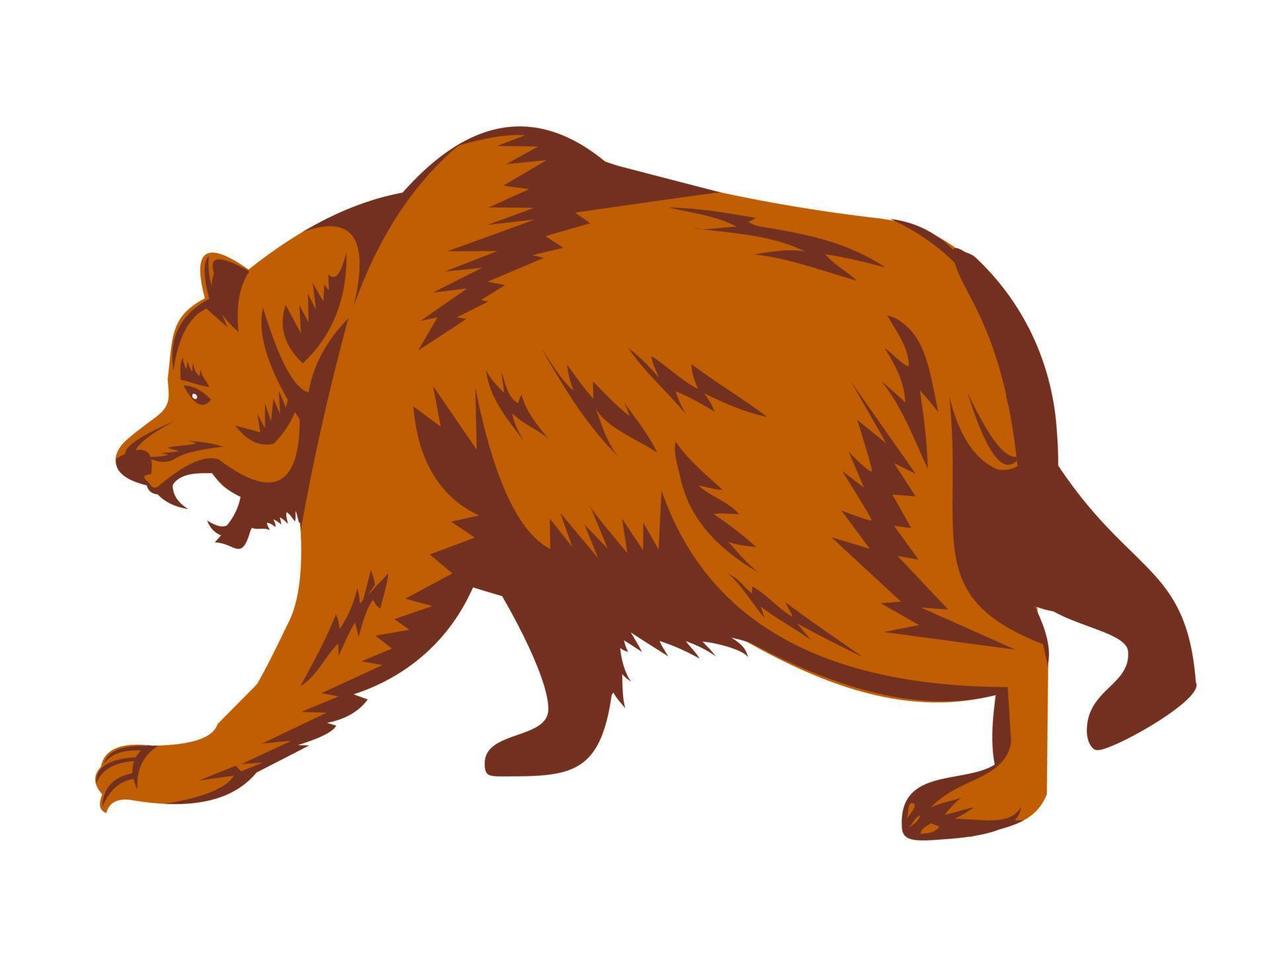 Angry Grizzly Bear or North American Brown Bear About to Attack Side Retro Woodcut Style vector